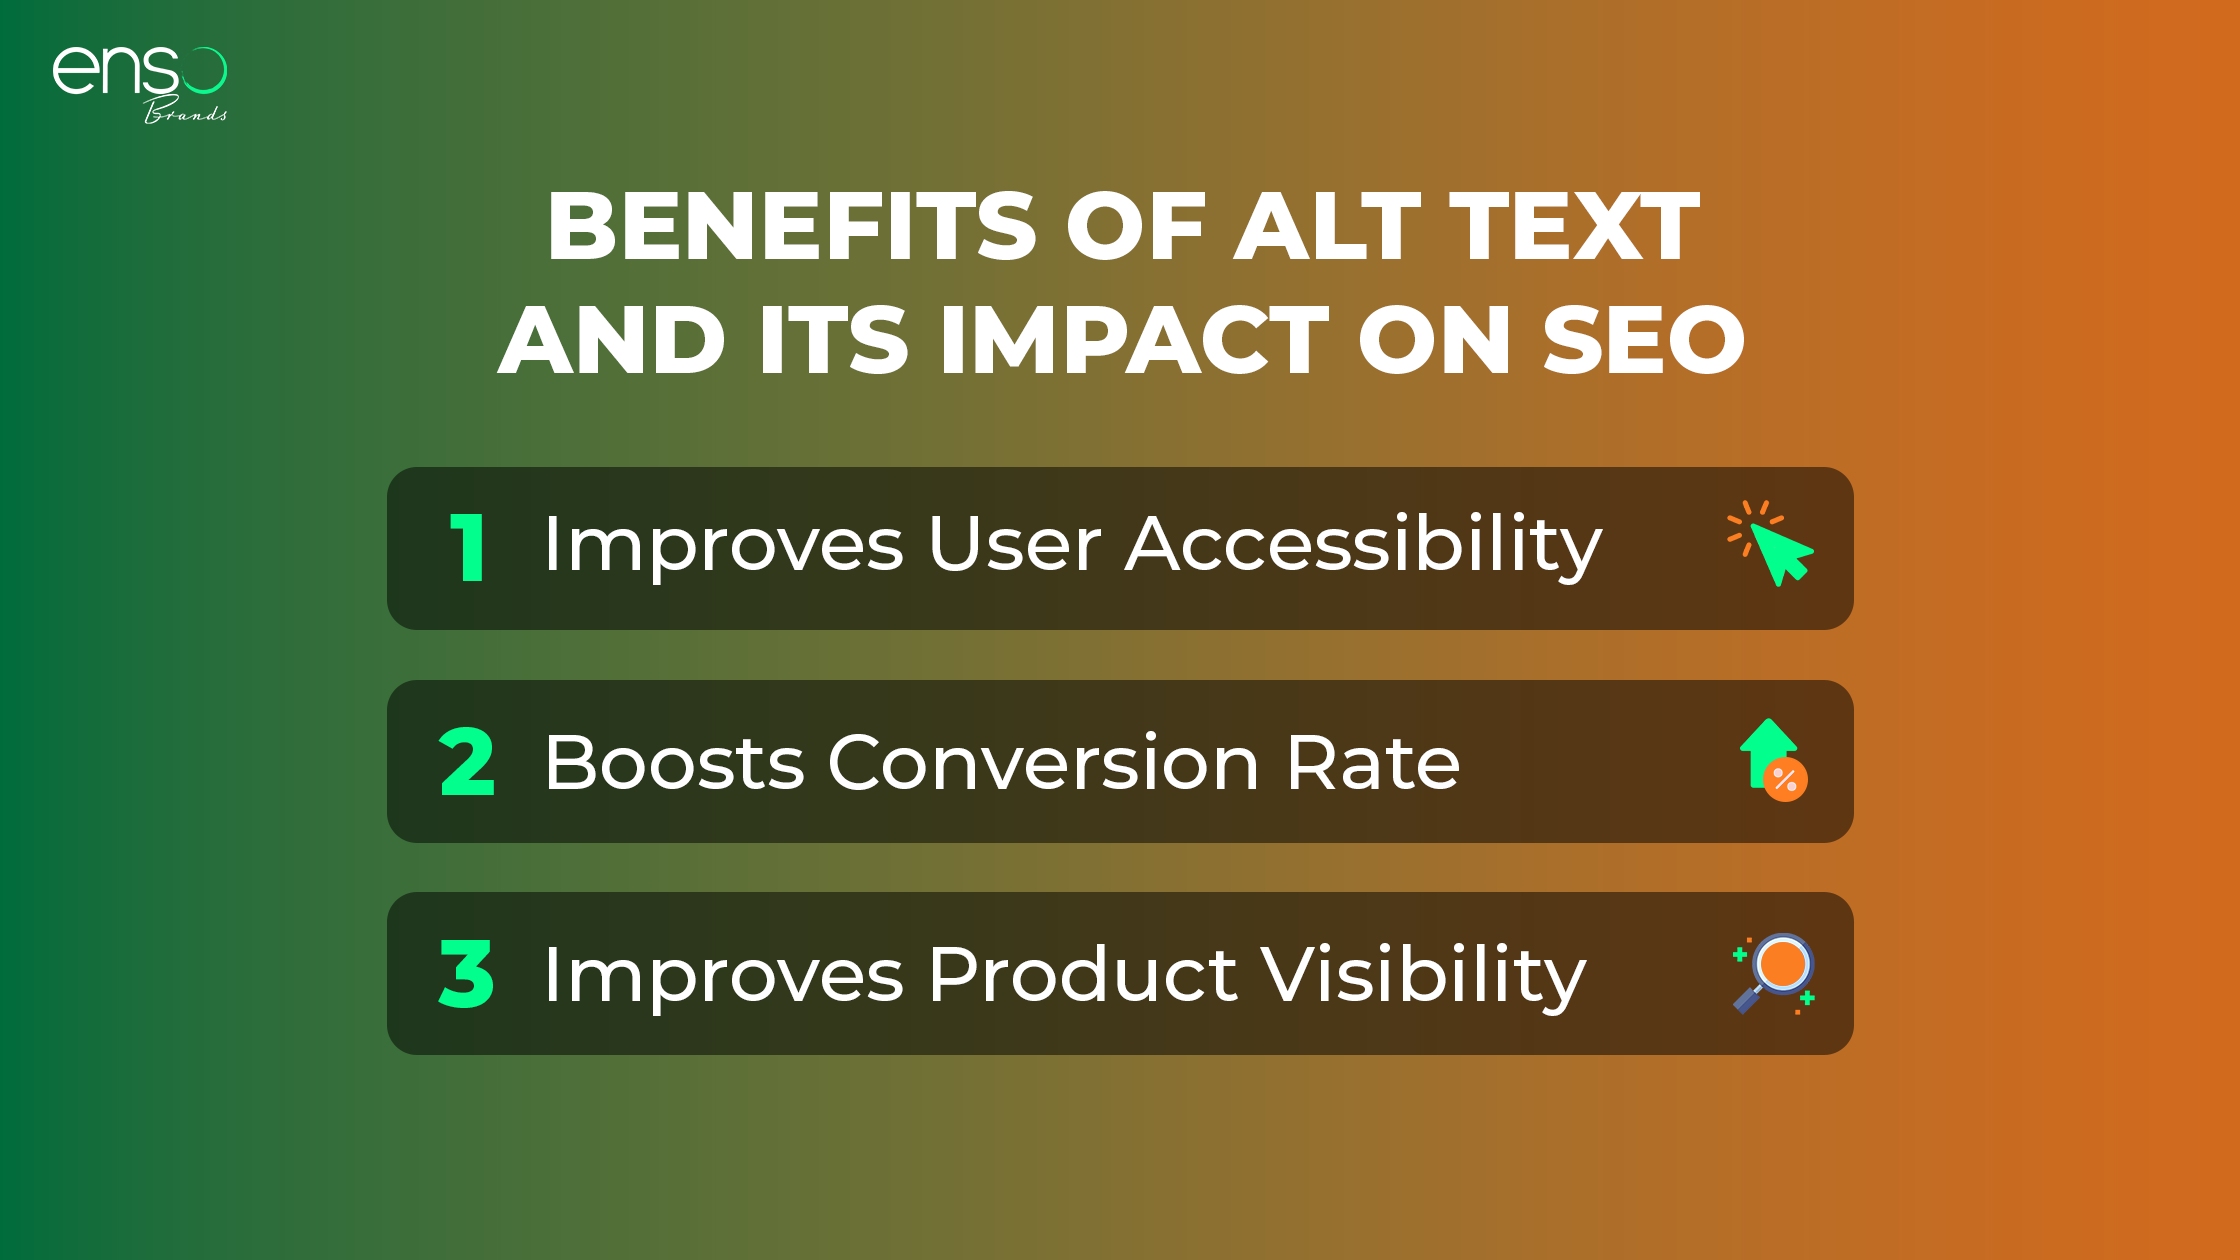 Benefits of Alt Text for A+ Content Images